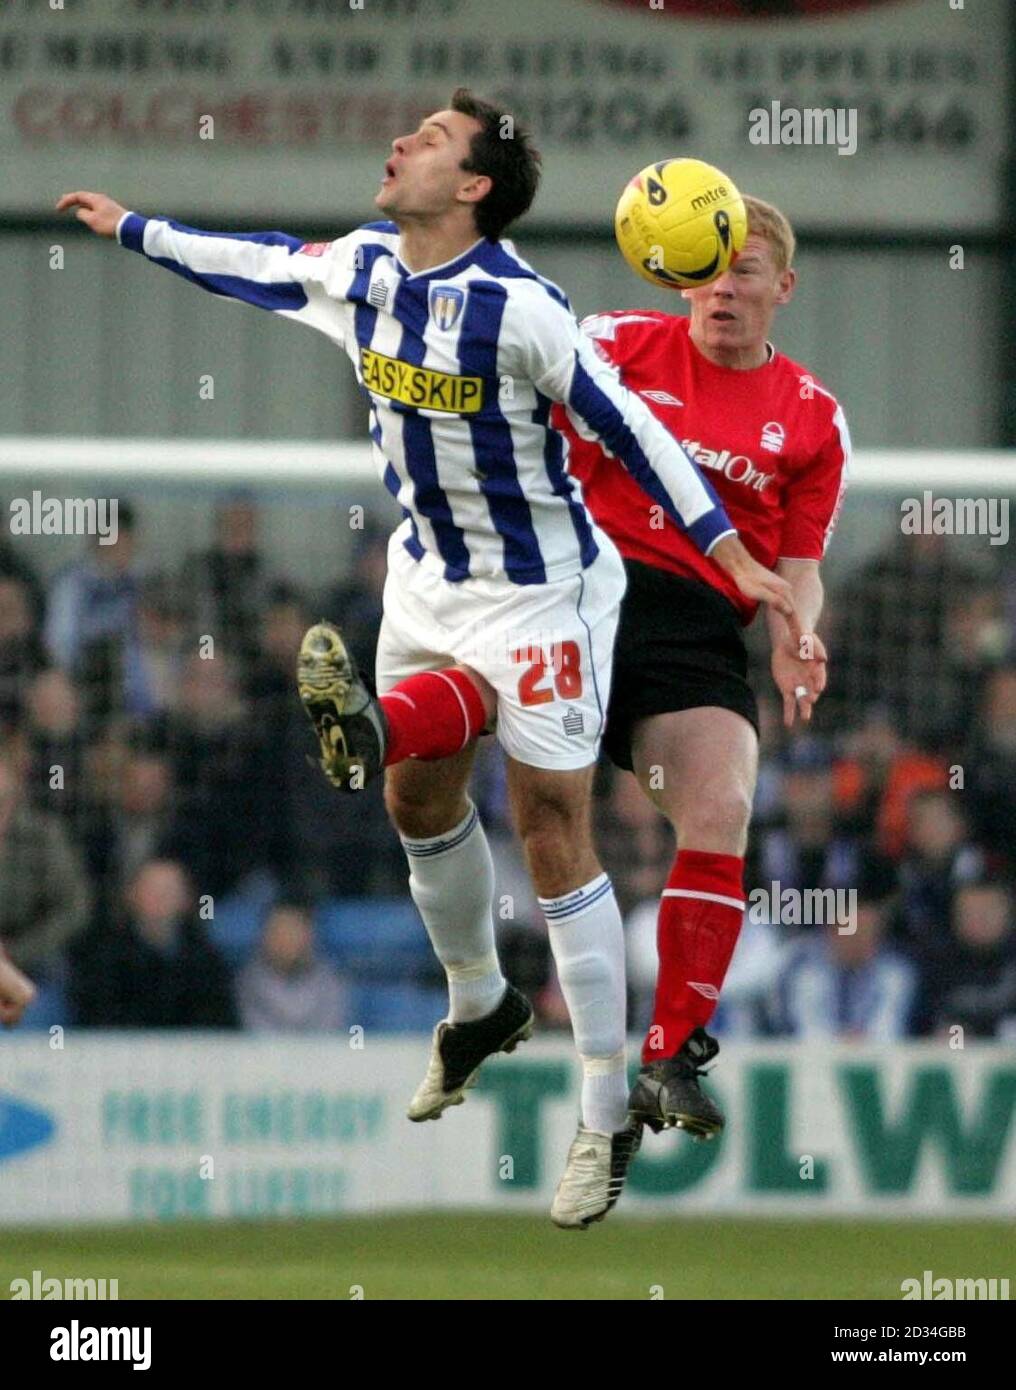 Colchester's Richard Garcia (L) jumps for the ball with Nottingham Forest's Gary Holt during the Coca-Cola Division One match at Layer Road, Colchester, Monday January 2, 2006. PRESS ASSOCIATION Photo. Photo credit should read: Mark Lees/PA. THIS PICTURE CAN ONLY BE USED WITHIN THE CONTEXT OF AN EDITORIAL FEATURE. NO UNOFFICIAL CLUB WEBSITE USE. Stock Photo